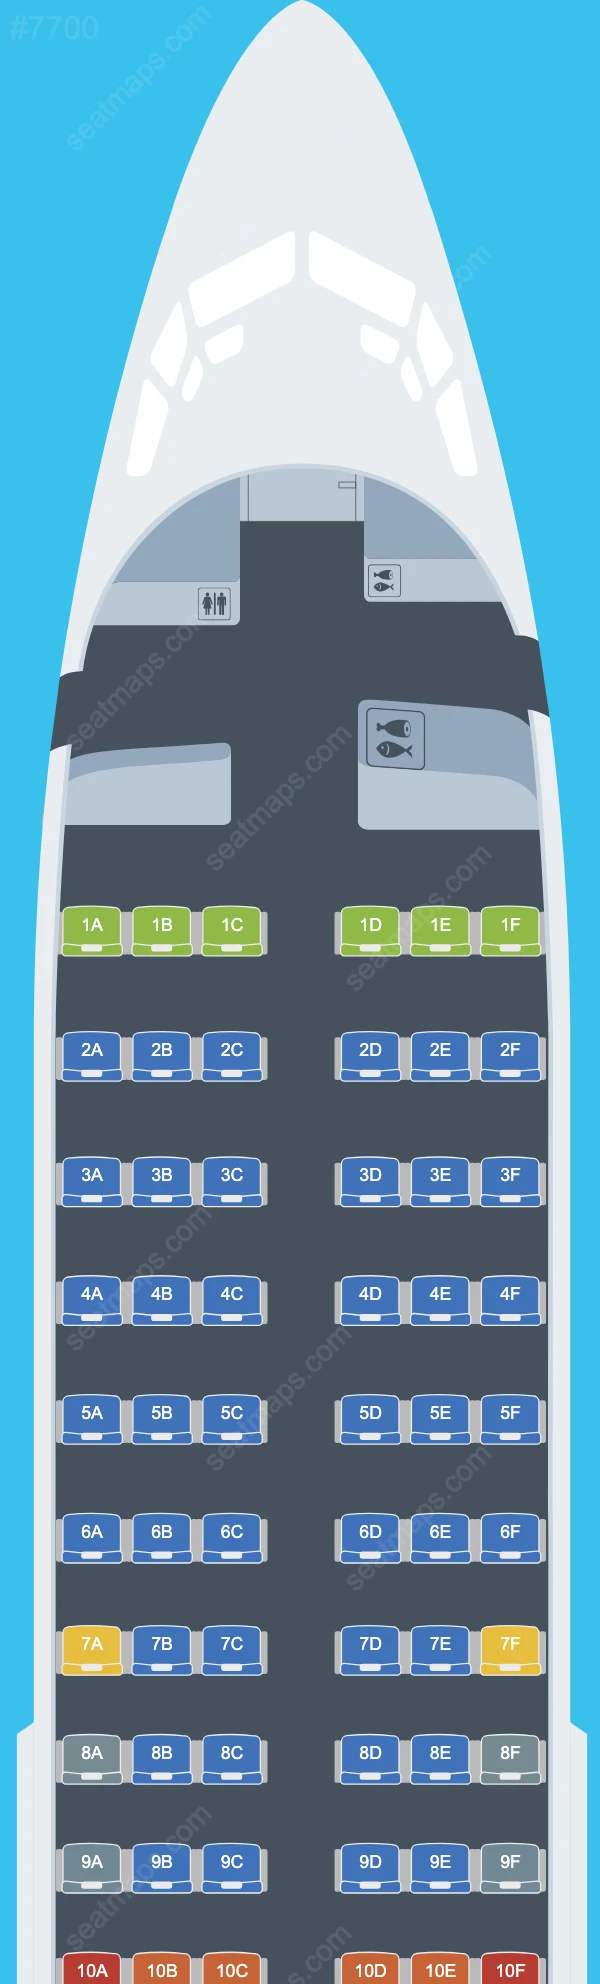 KLM Boeing 737 Seat Maps 737-700